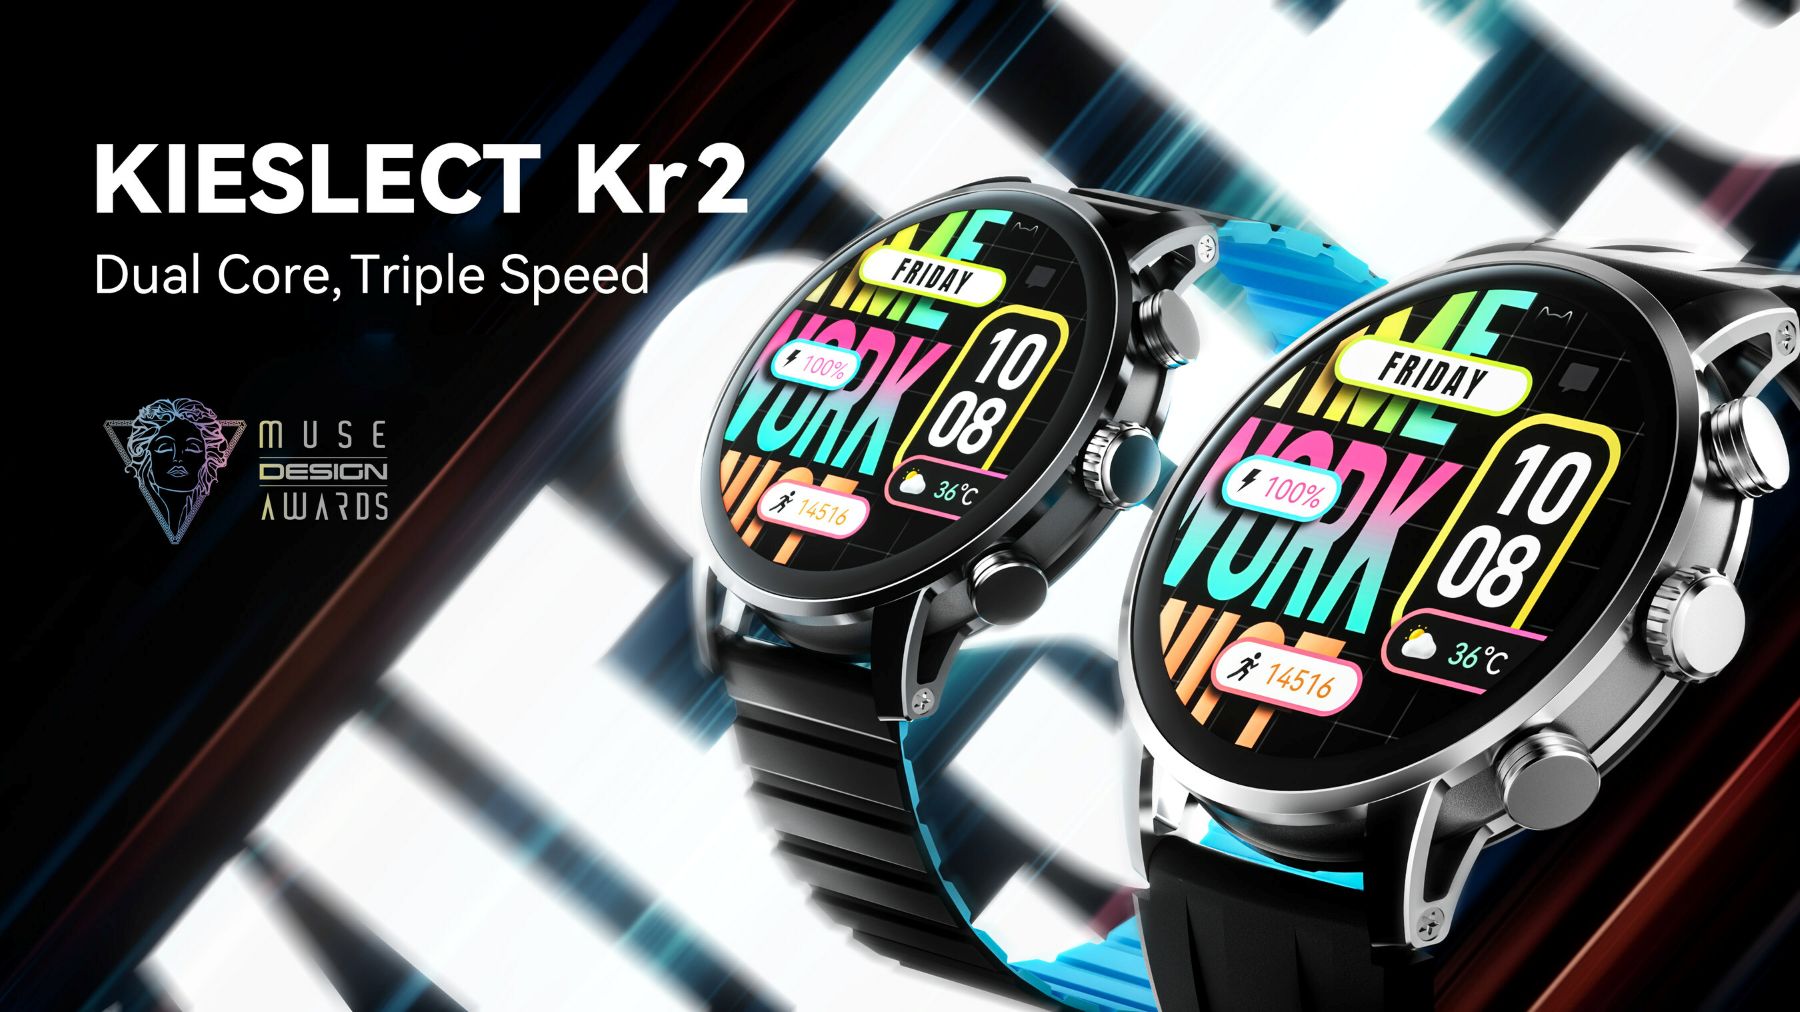 The Kieslect Kr2 Launches with “Dual Core, Triple Speed” Technology, a 2.5D GPU Super Dynamic Display, and much, much more